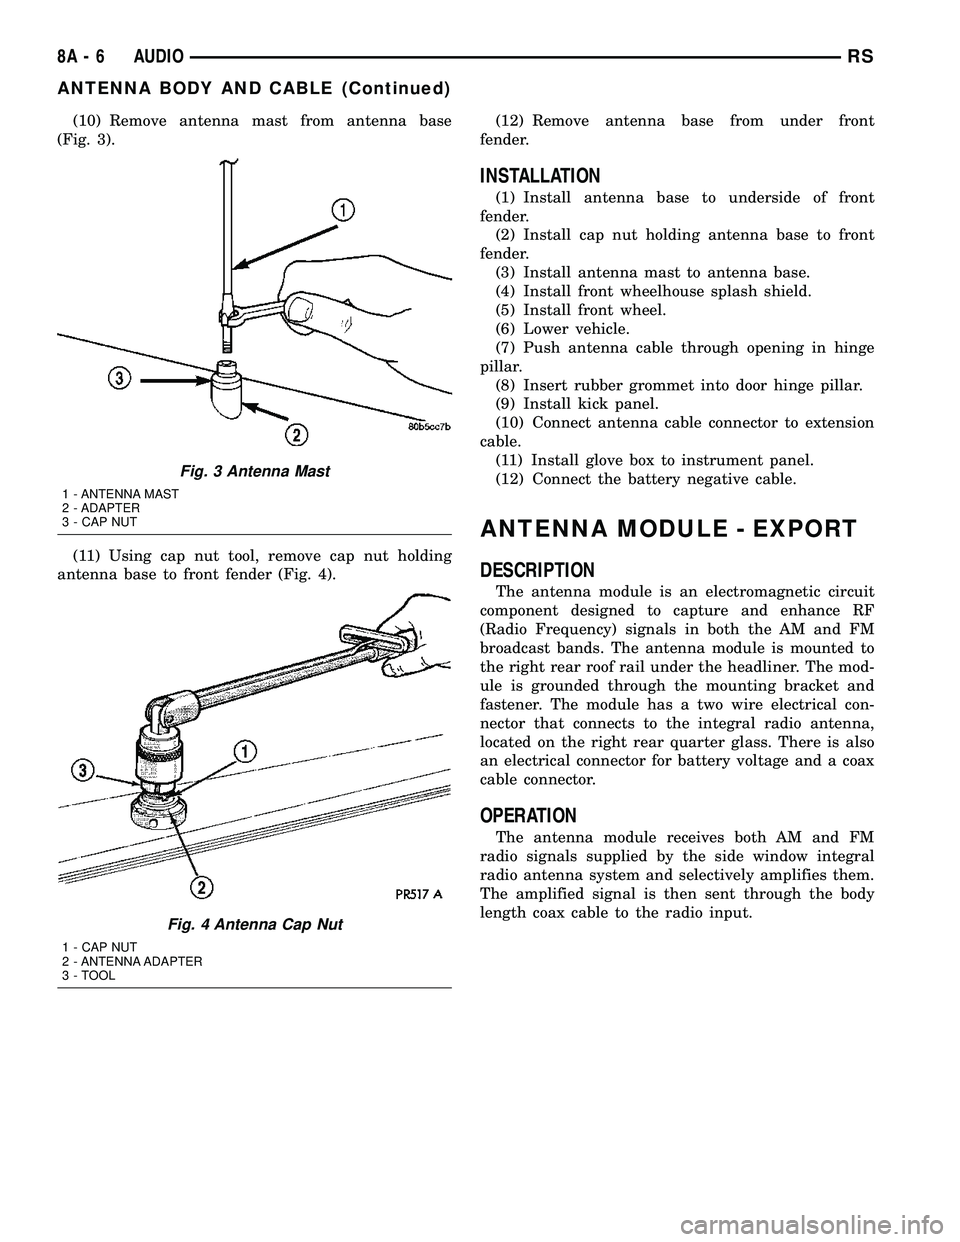 DODGE TOWN AND COUNTRY 2004  Service Manual (10) Remove antenna mast from antenna base
(Fig. 3).
(11) Using cap nut tool, remove cap nut holding
antenna base to front fender (Fig. 4).(12) Remove antenna base from under front
fender.
INSTALLATIO